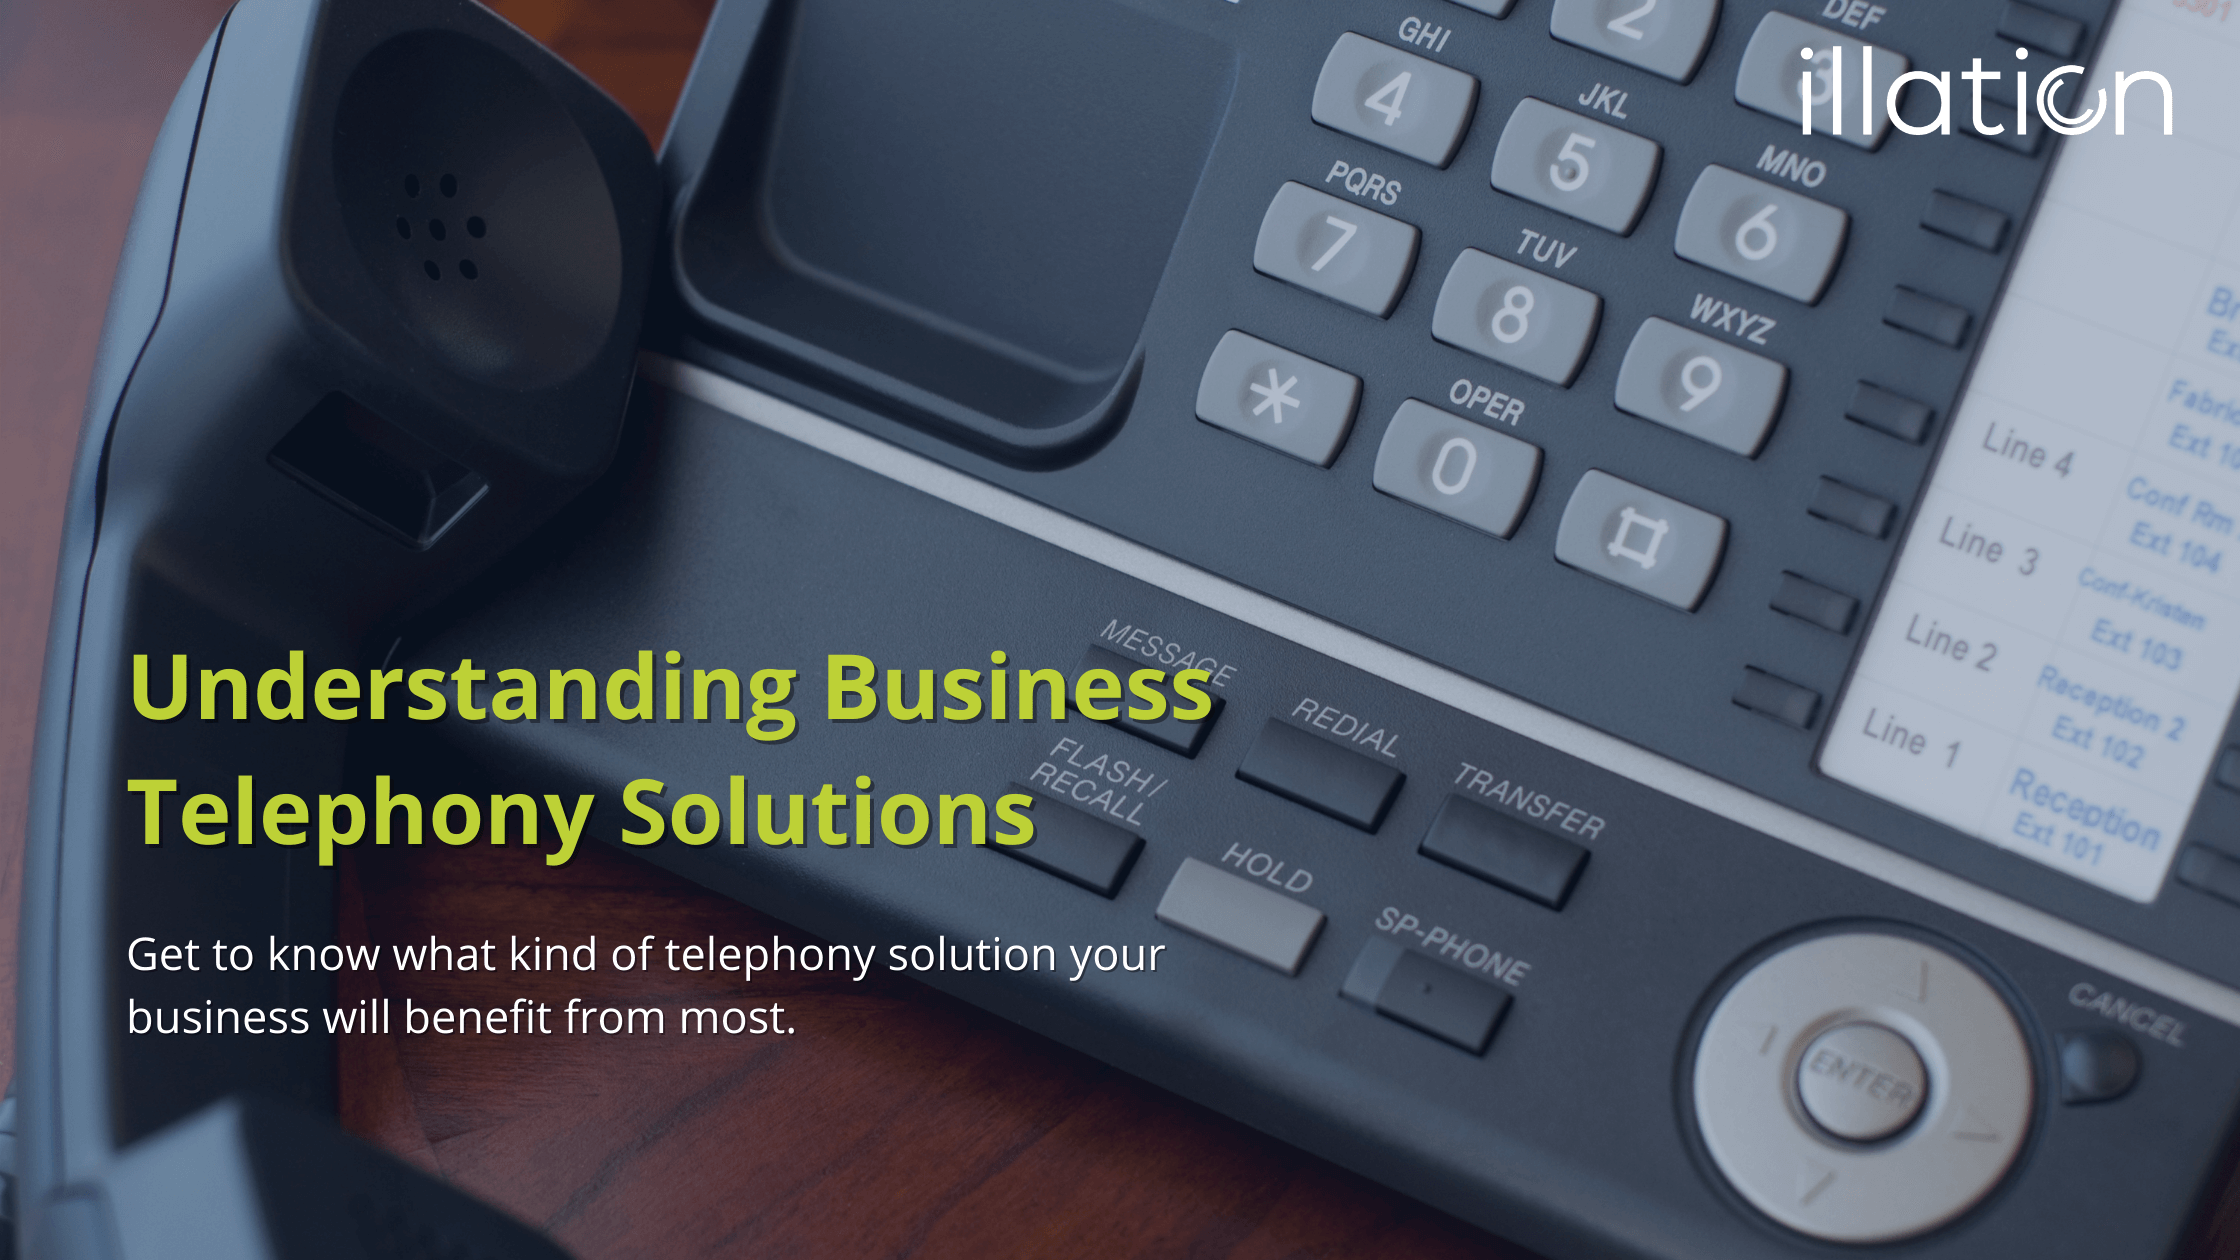 Understanding Business Telephony Solutions